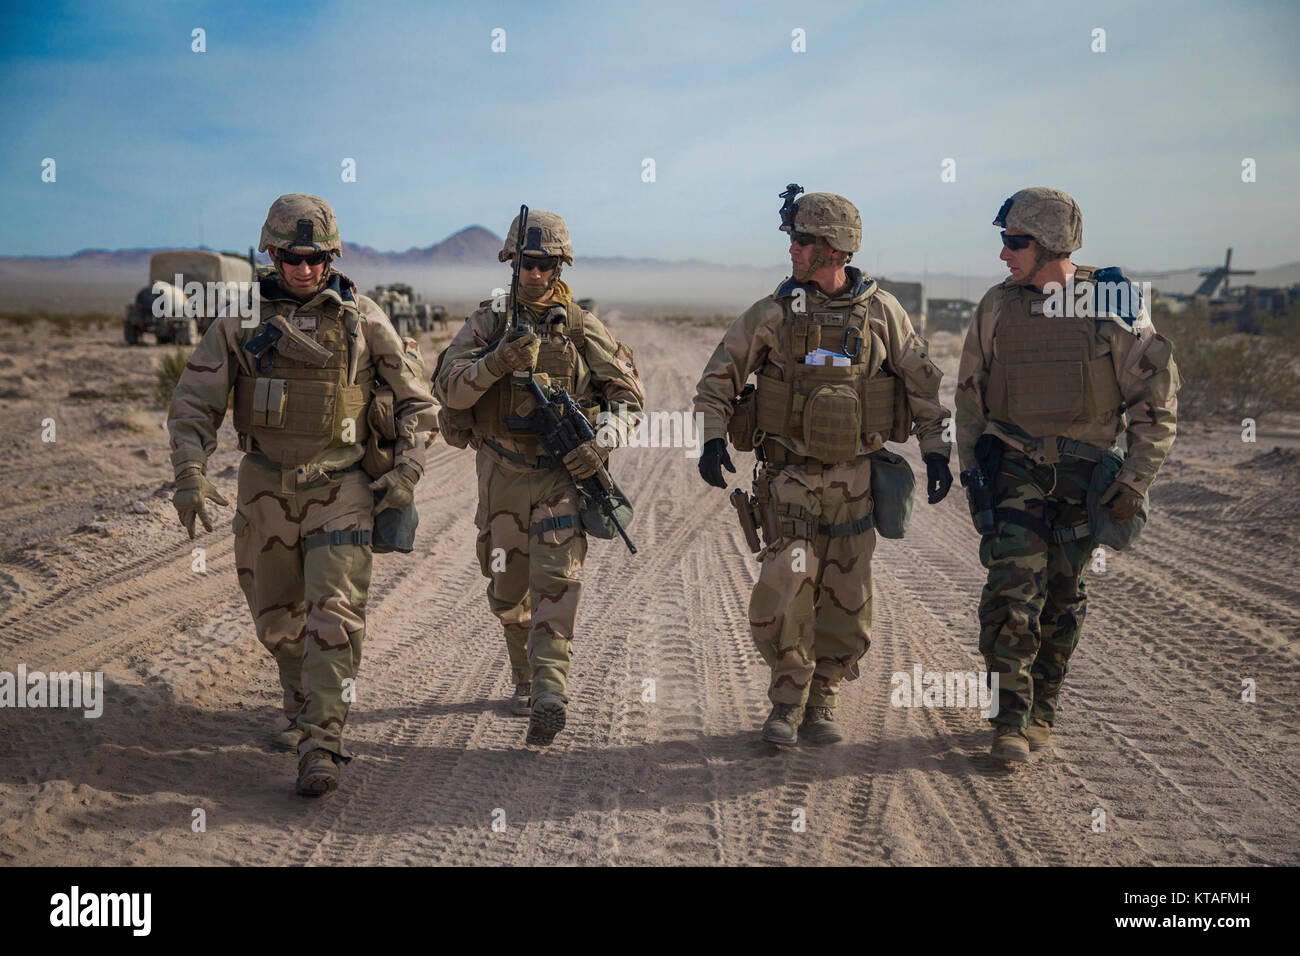 U.S. Marine Corps Maj. Gen. Eric M. Smith, center right, the commanding general for 1st Marine Division, walks alongside his staff during a battle field circulation (BFC) at Marine Corps Air Ground Combat Center, Twentynine Palms, Calif., Dec. 10, 2017. Smith's BFC consisted of visiting various units participating in exercise Steel Knight 2018. (U.S. Marines Corps Stock Photo